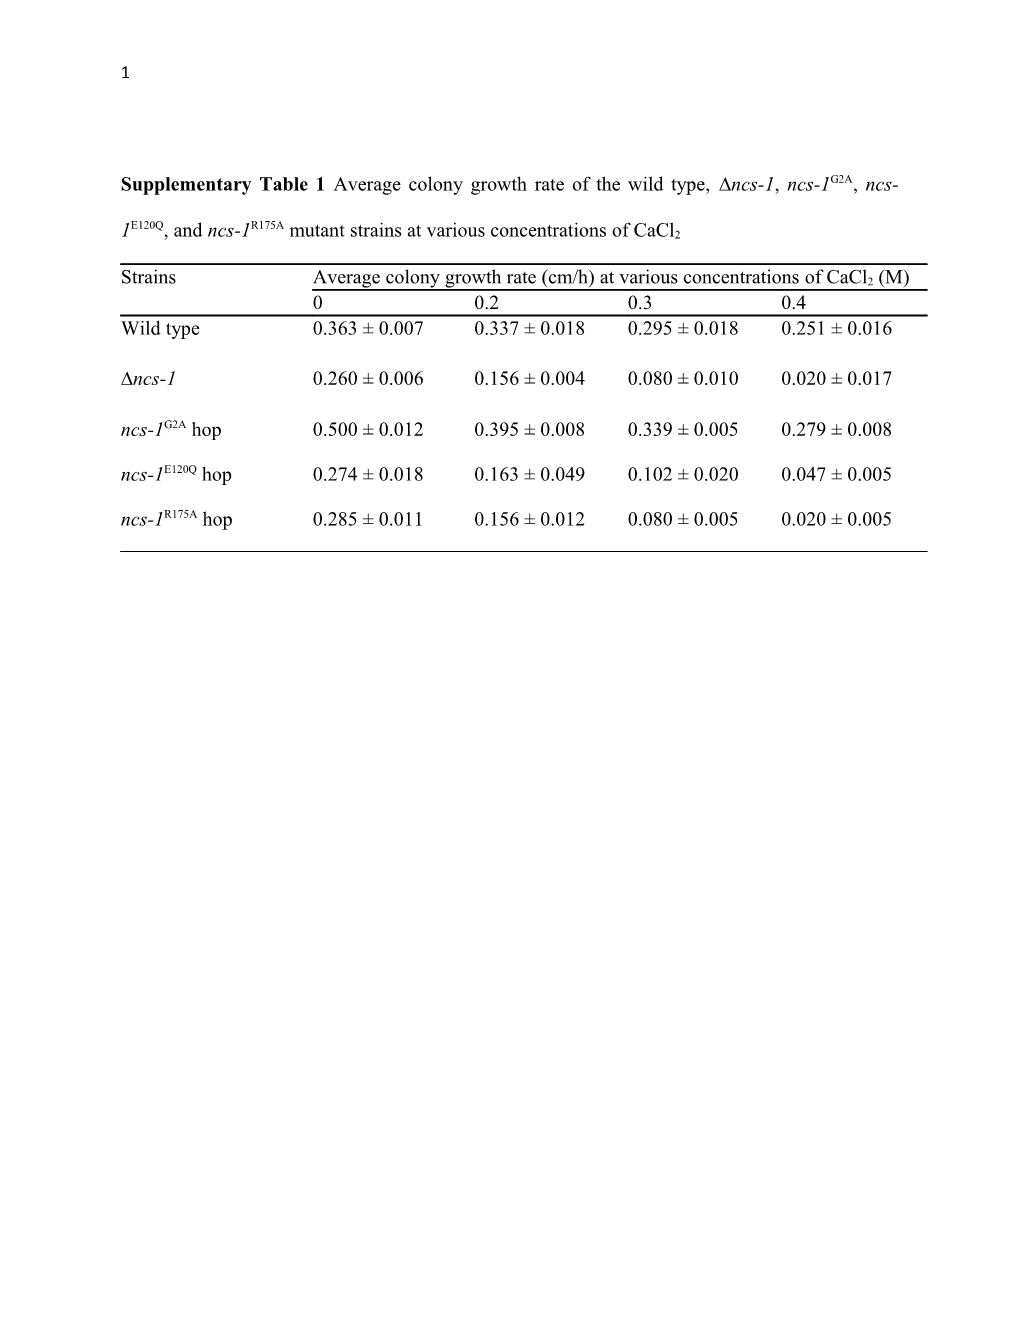 Supplementary Table 1 Average Colony Growth Rate of the Wild Type, Ncs-1, Ncs-1G2A, Ncs-1E120Q